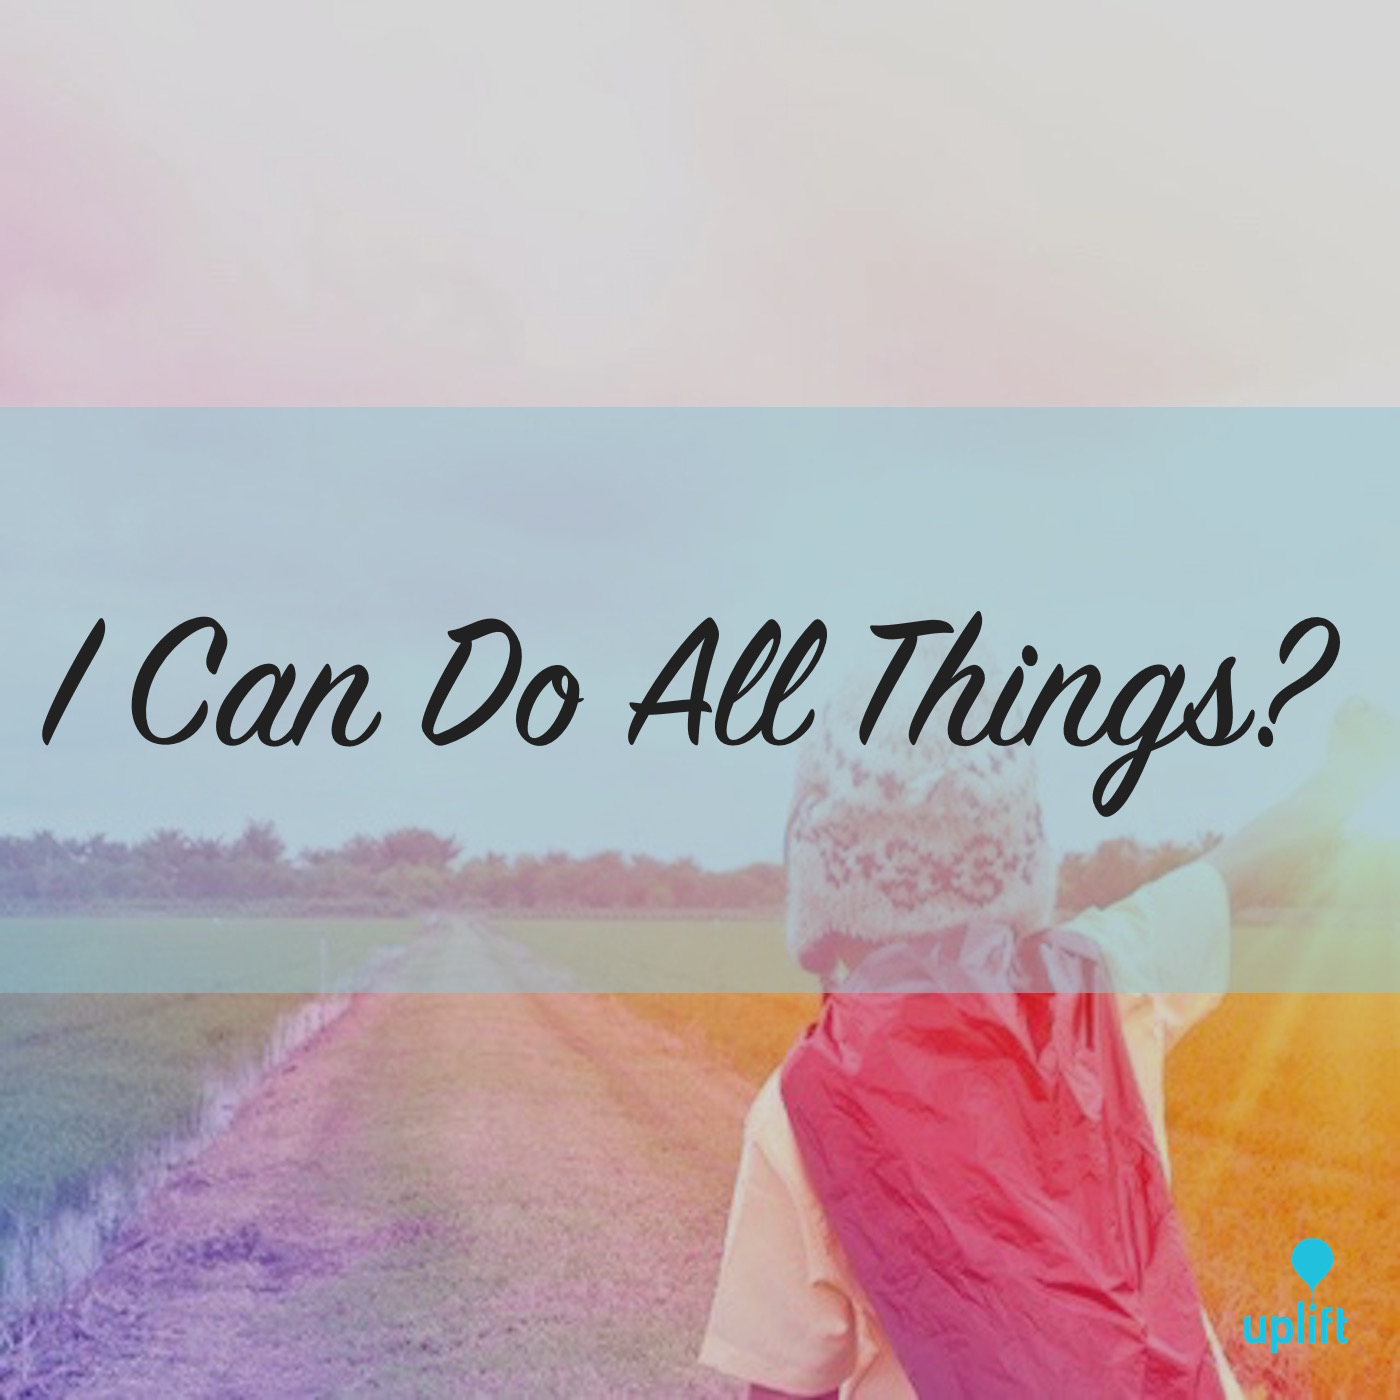 Episode 7: I Can Do All Things?